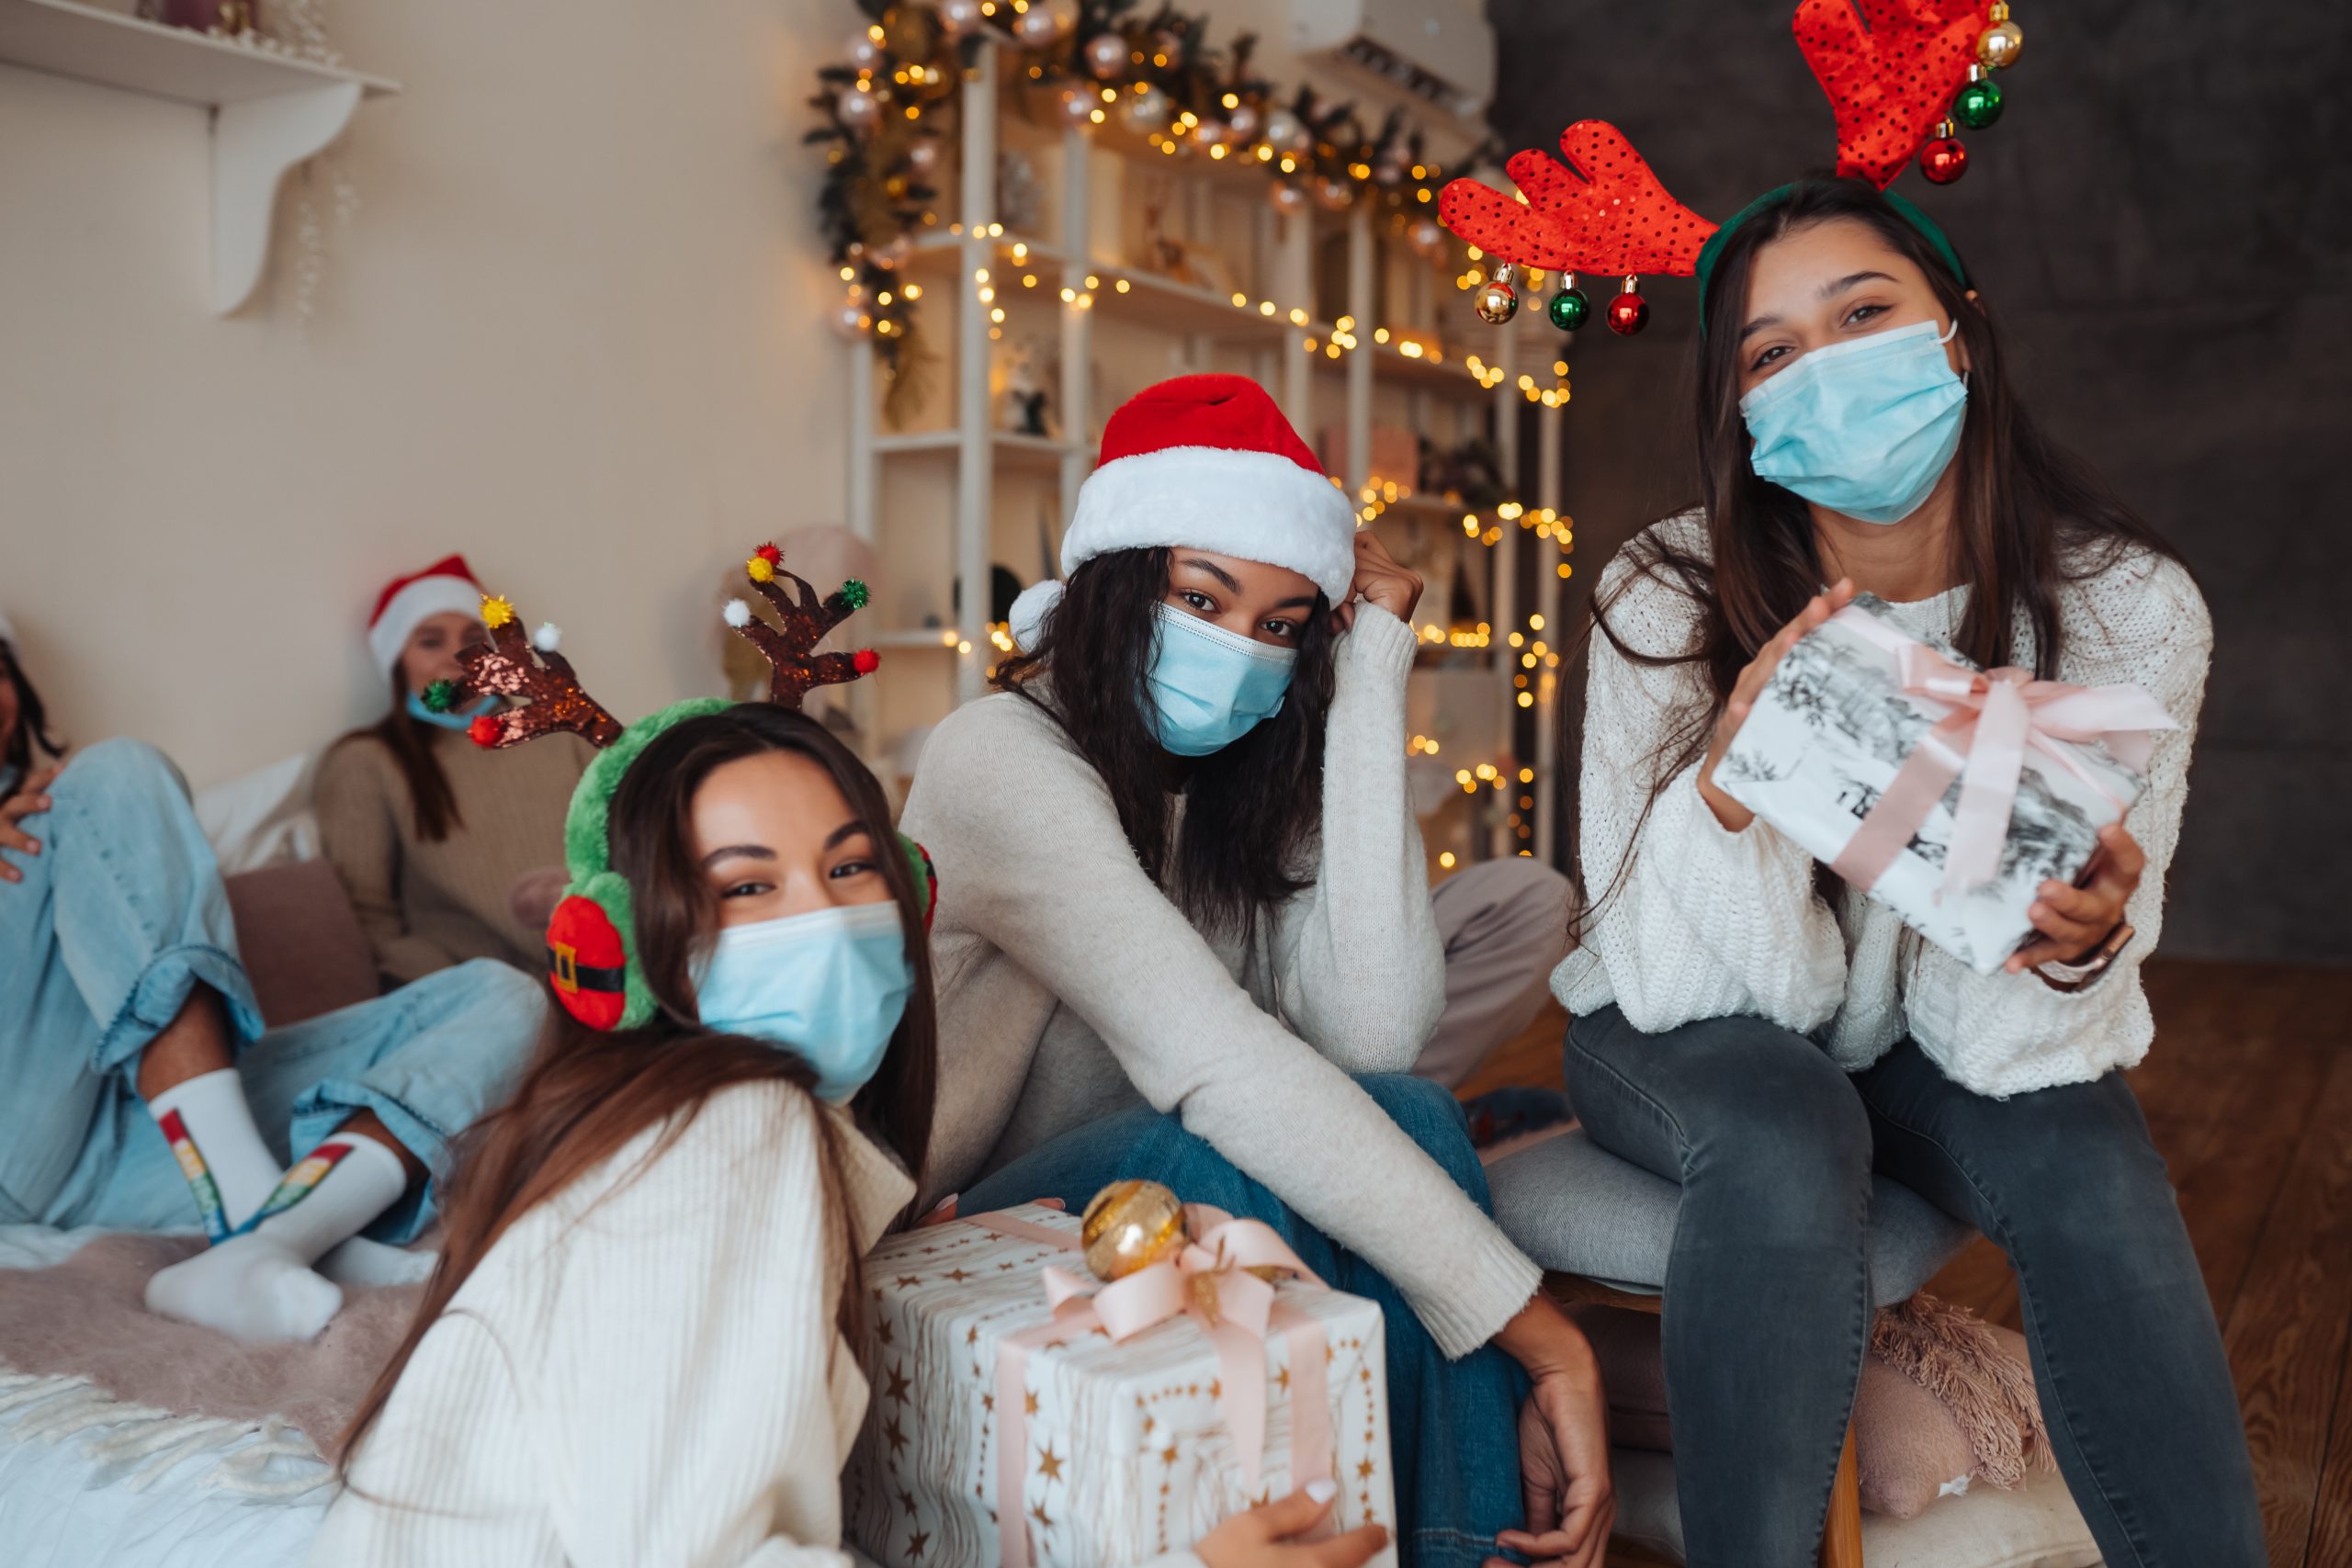 multiethnic-group-friends-santa-hats-smiling-posing-camera-with-gifts-hands-concept-celebrating-new-year-christmas-coronavirus-restrictions-holiday-quarantine-scaled.jpg